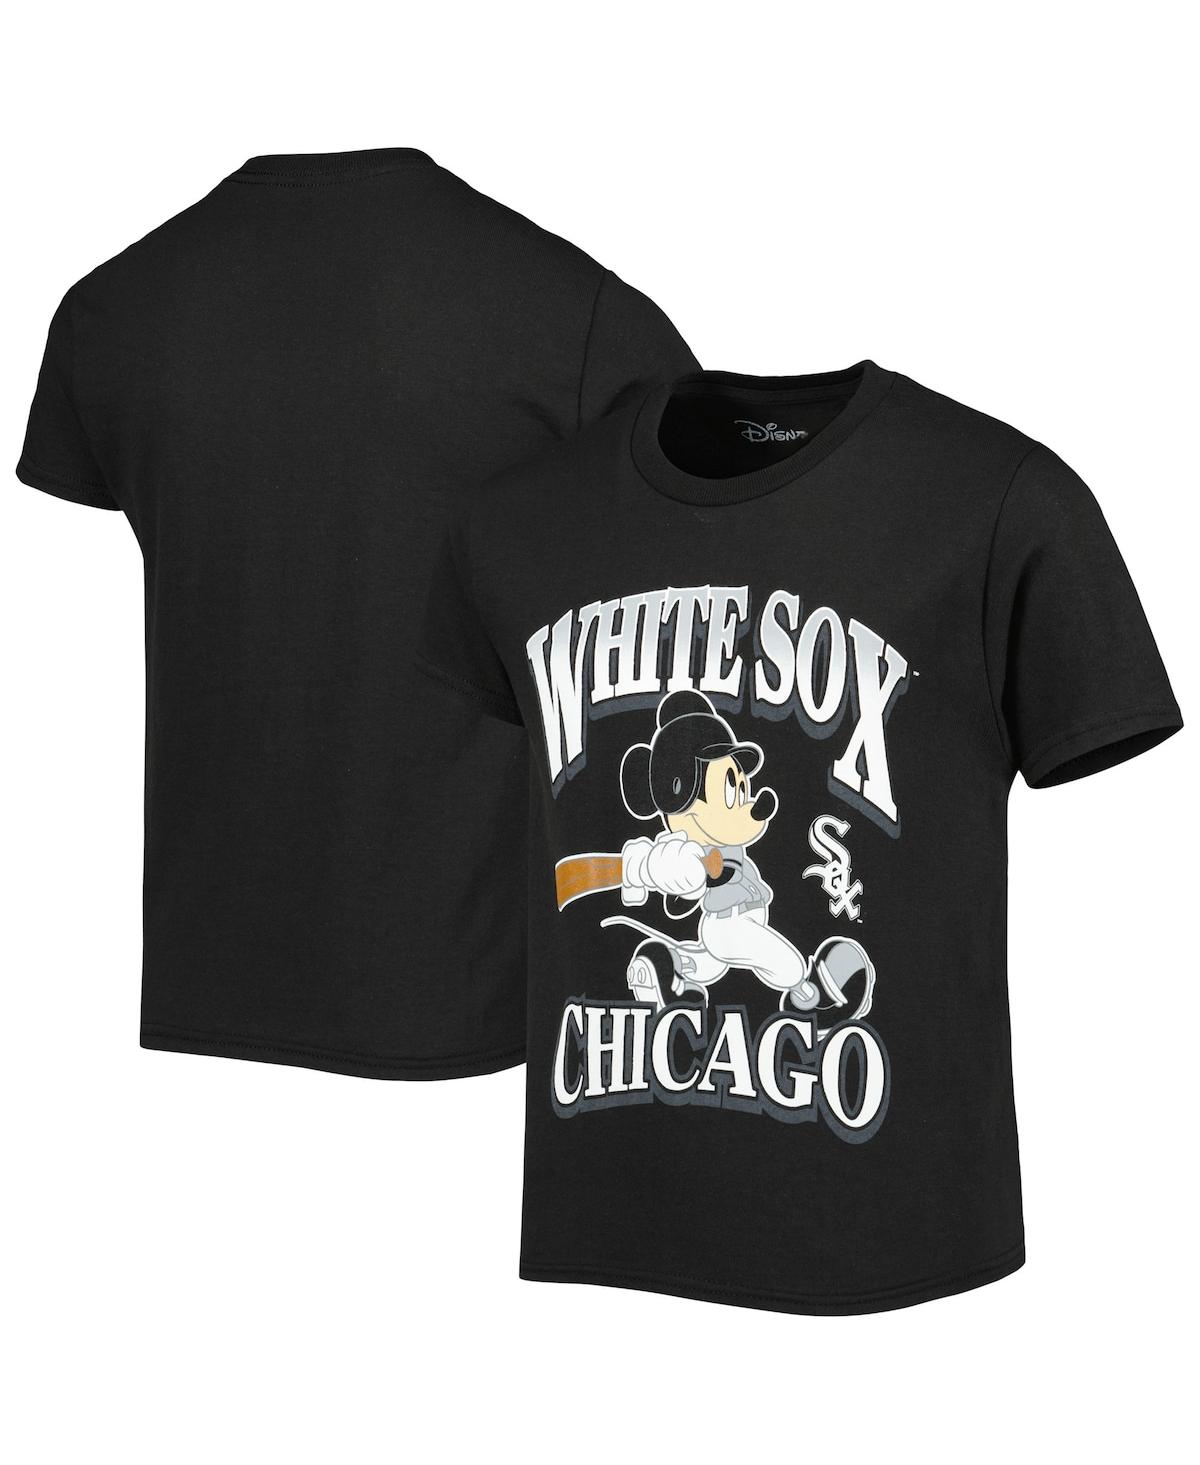 Outerstuff Kids' Big Boys And Girls Black Chicago White Sox Disney Game Day T-shirt